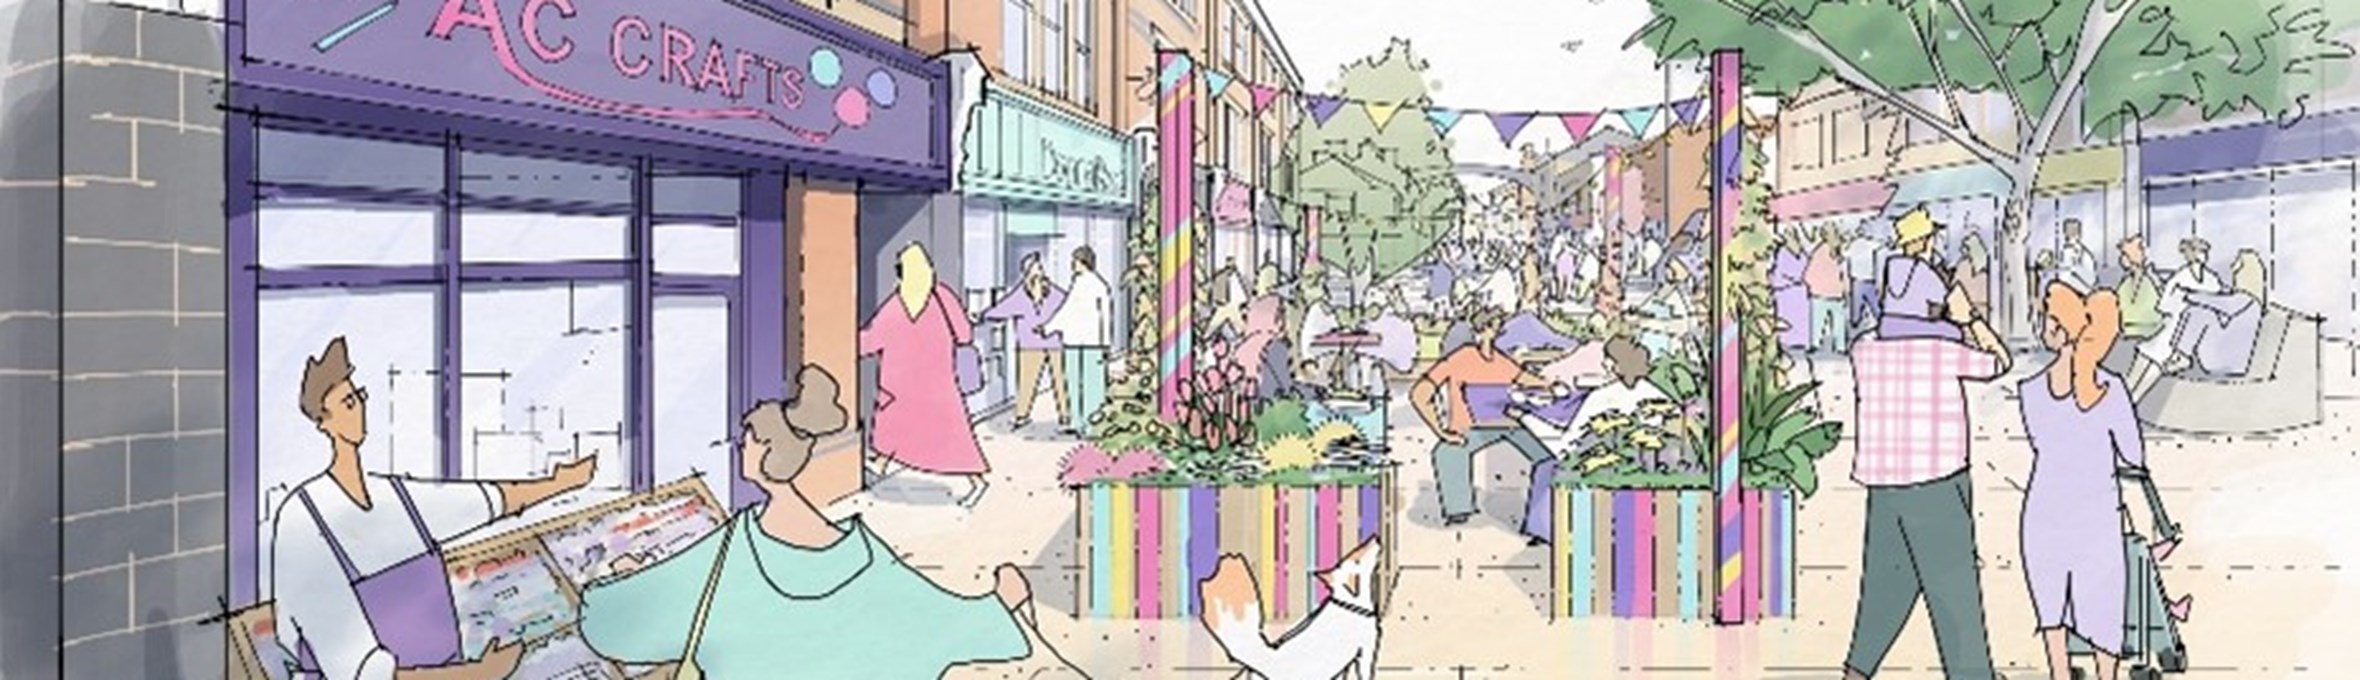 An artist impression of Hucknall High Street featuring new outdoor seating areas 